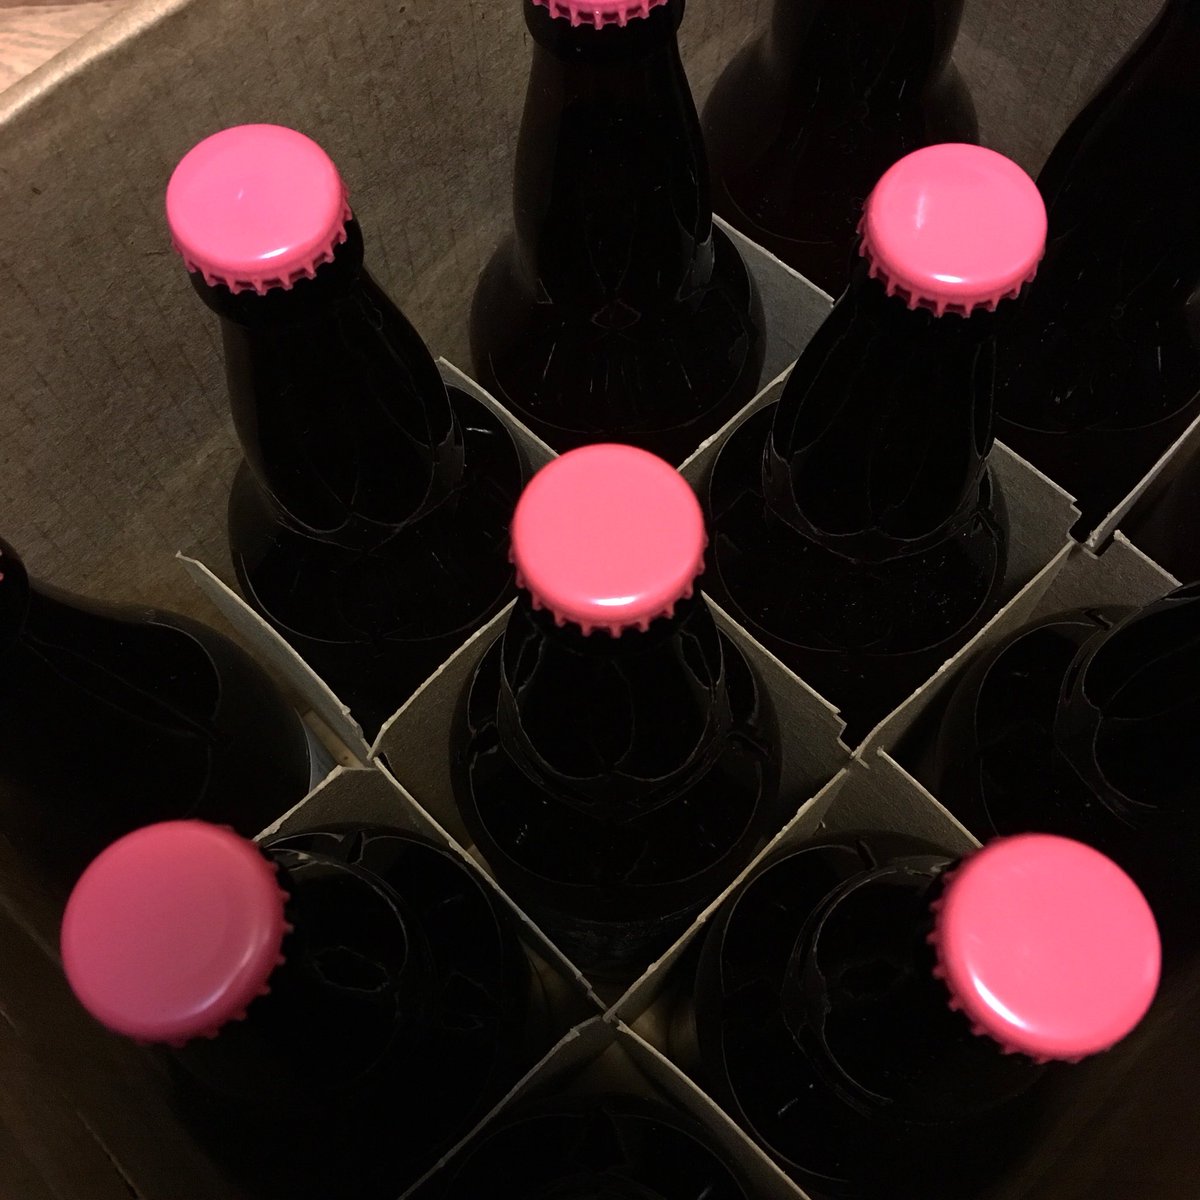 Bottled up my #blondeale tonight. Can’t wait to crack one open for #InternationalWomensDay 🍻 #womeninbeerrock #homebrew #womenwhobrew